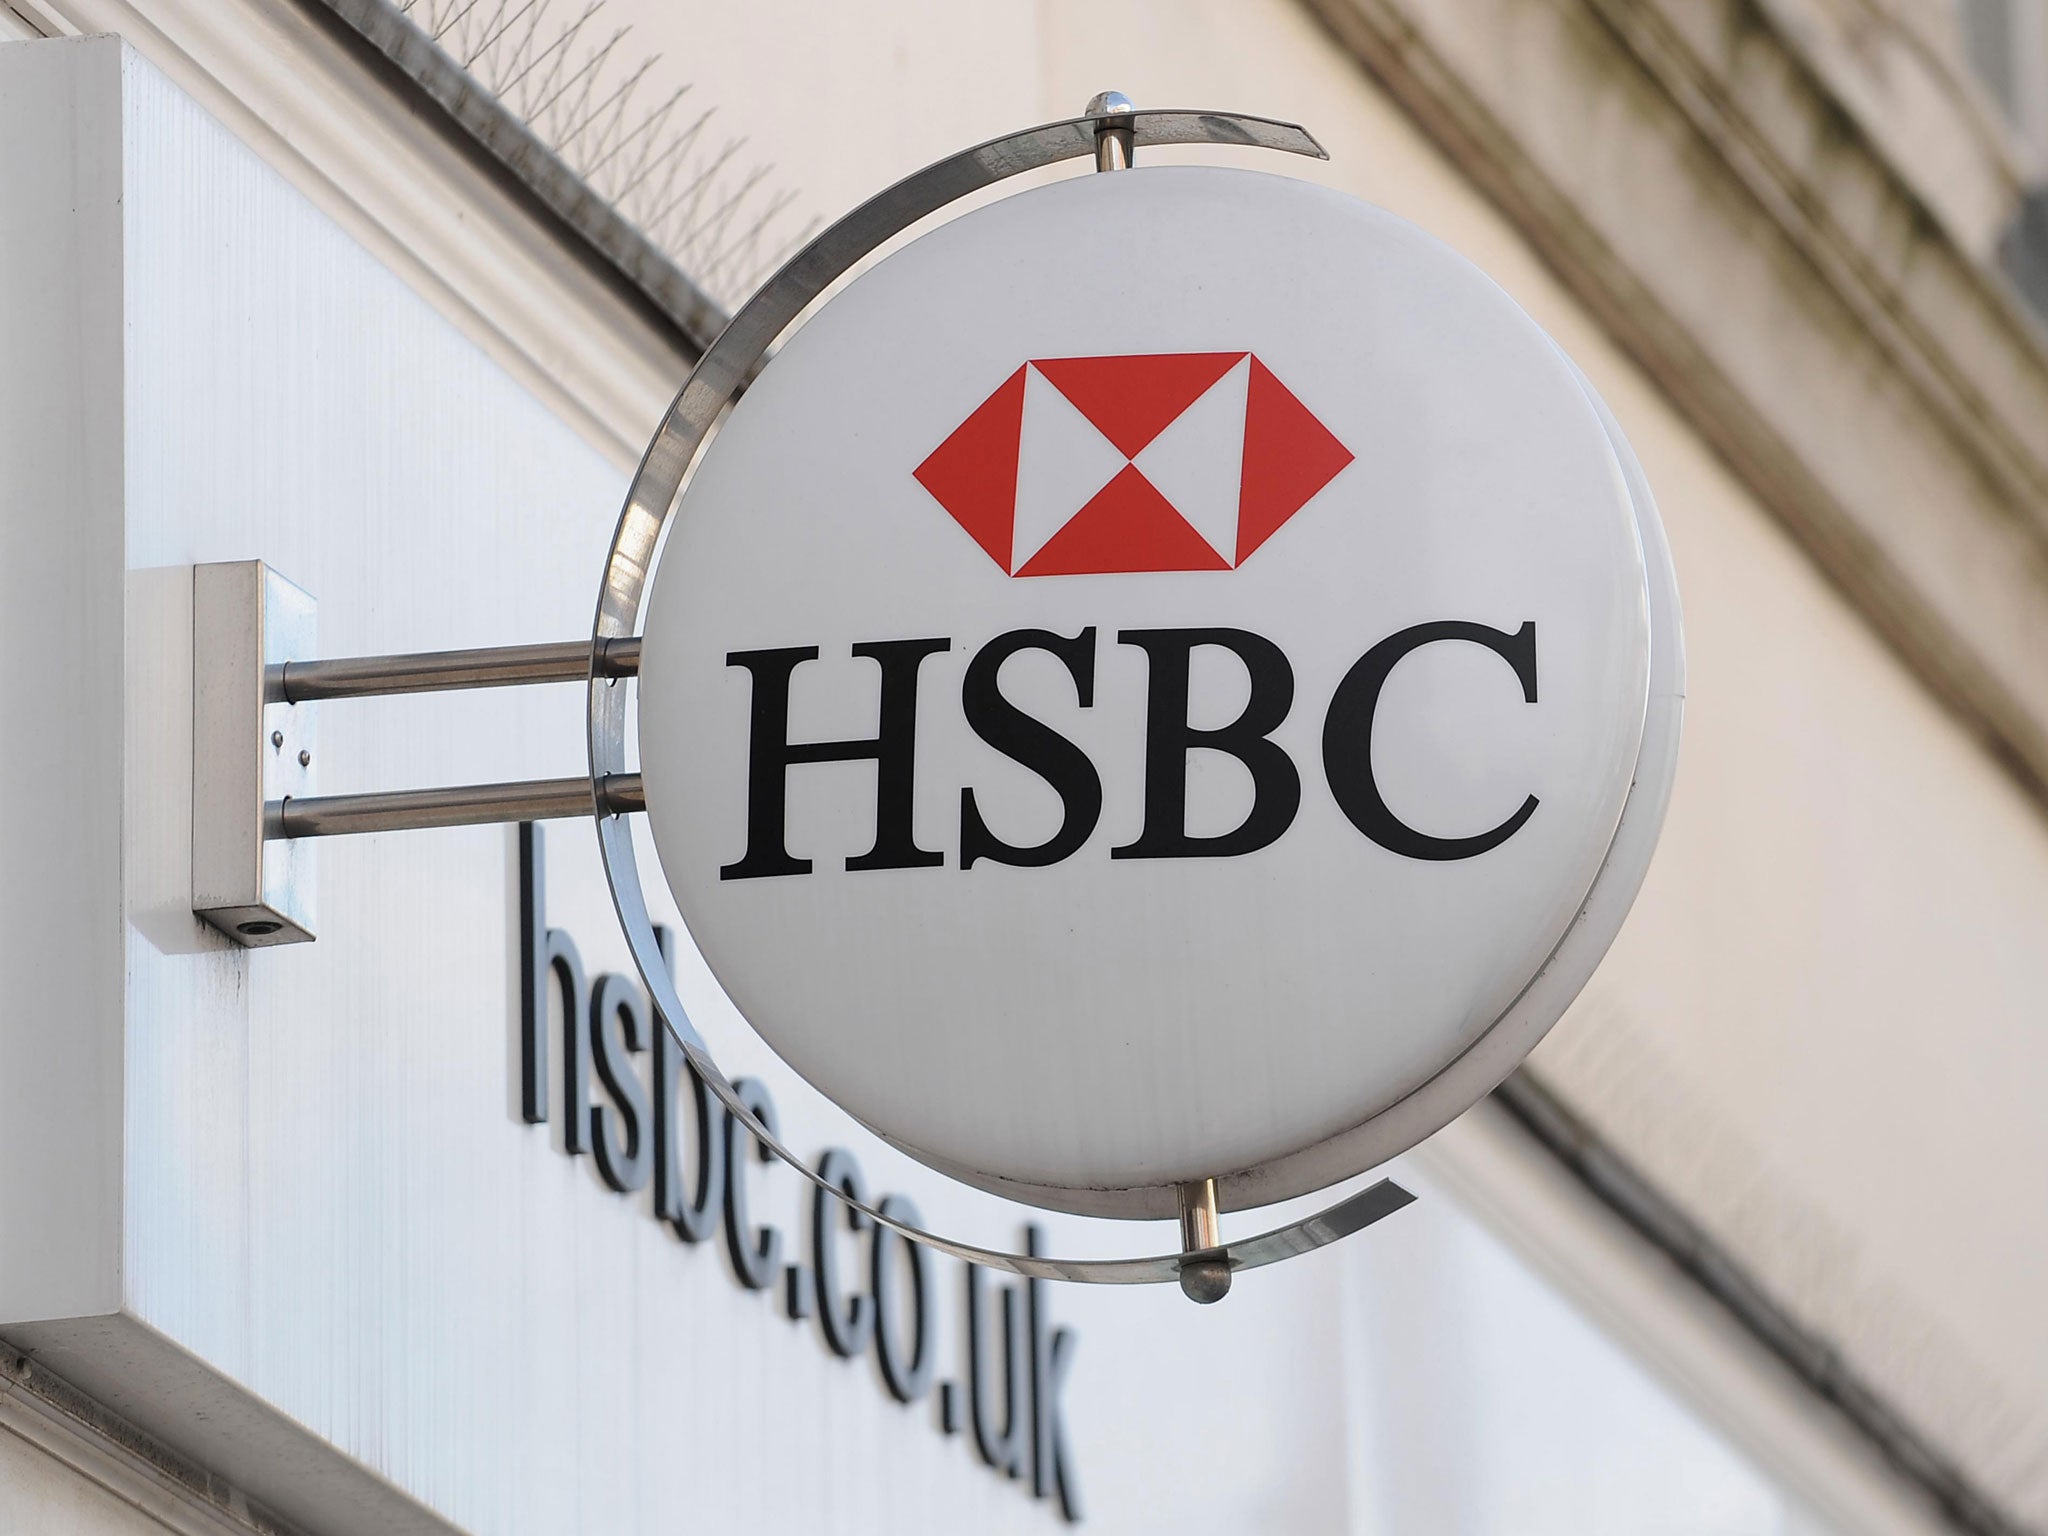 HSBC announced job cuts today, impacting on thousands of its staff